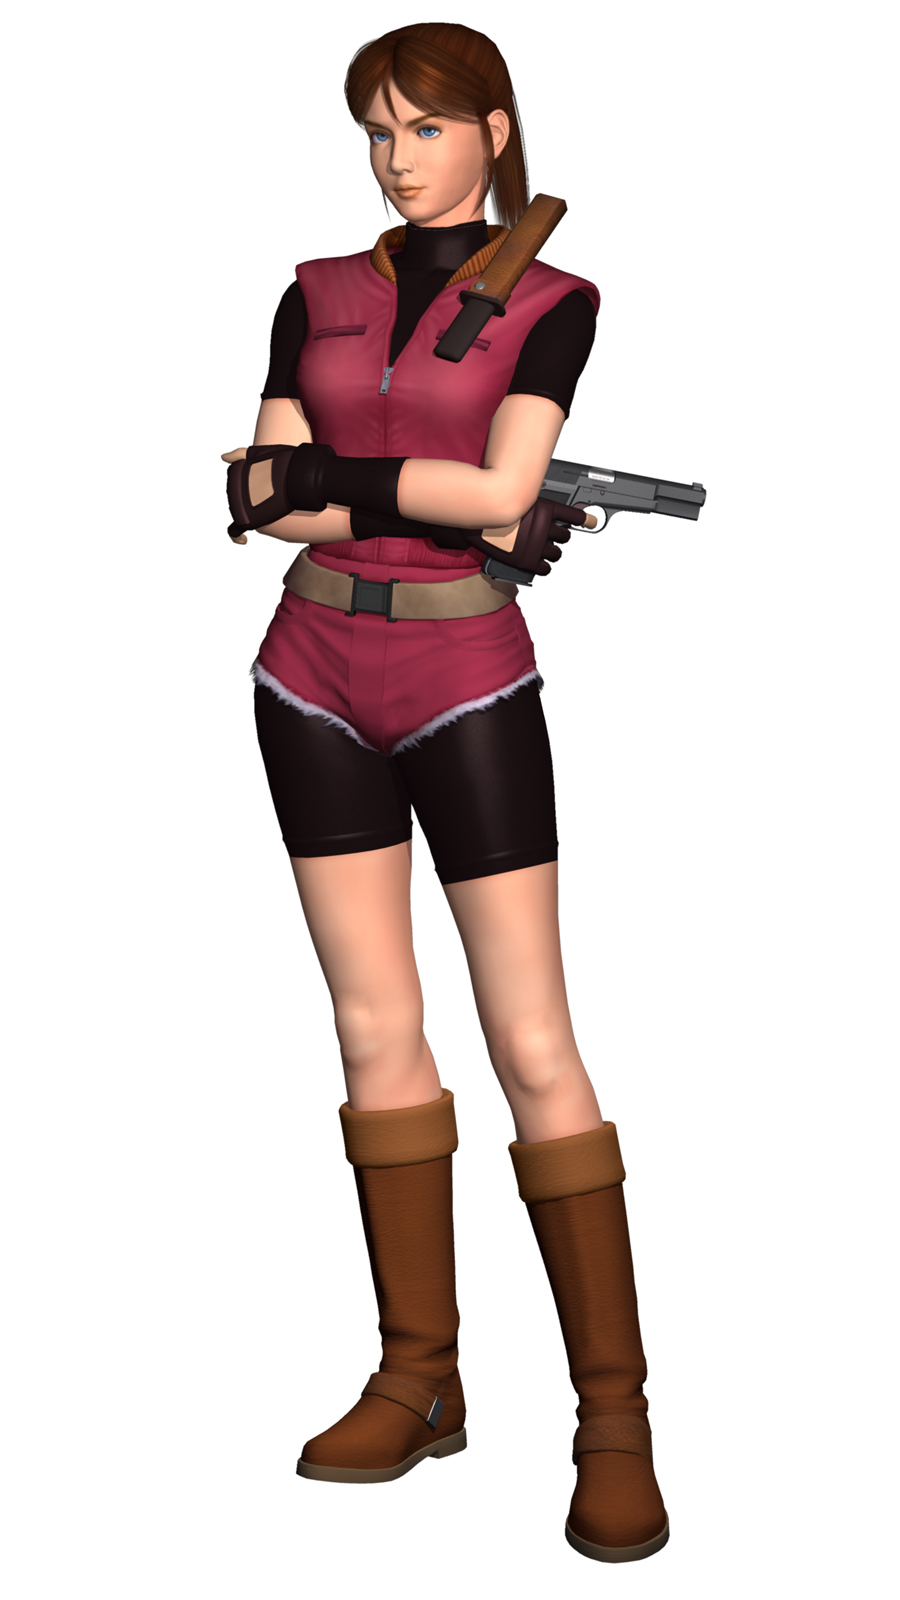 image-resident-evil-2-claire-redfield-render-jpg-resident-evil-wiki-fandom-powered-by-wikia